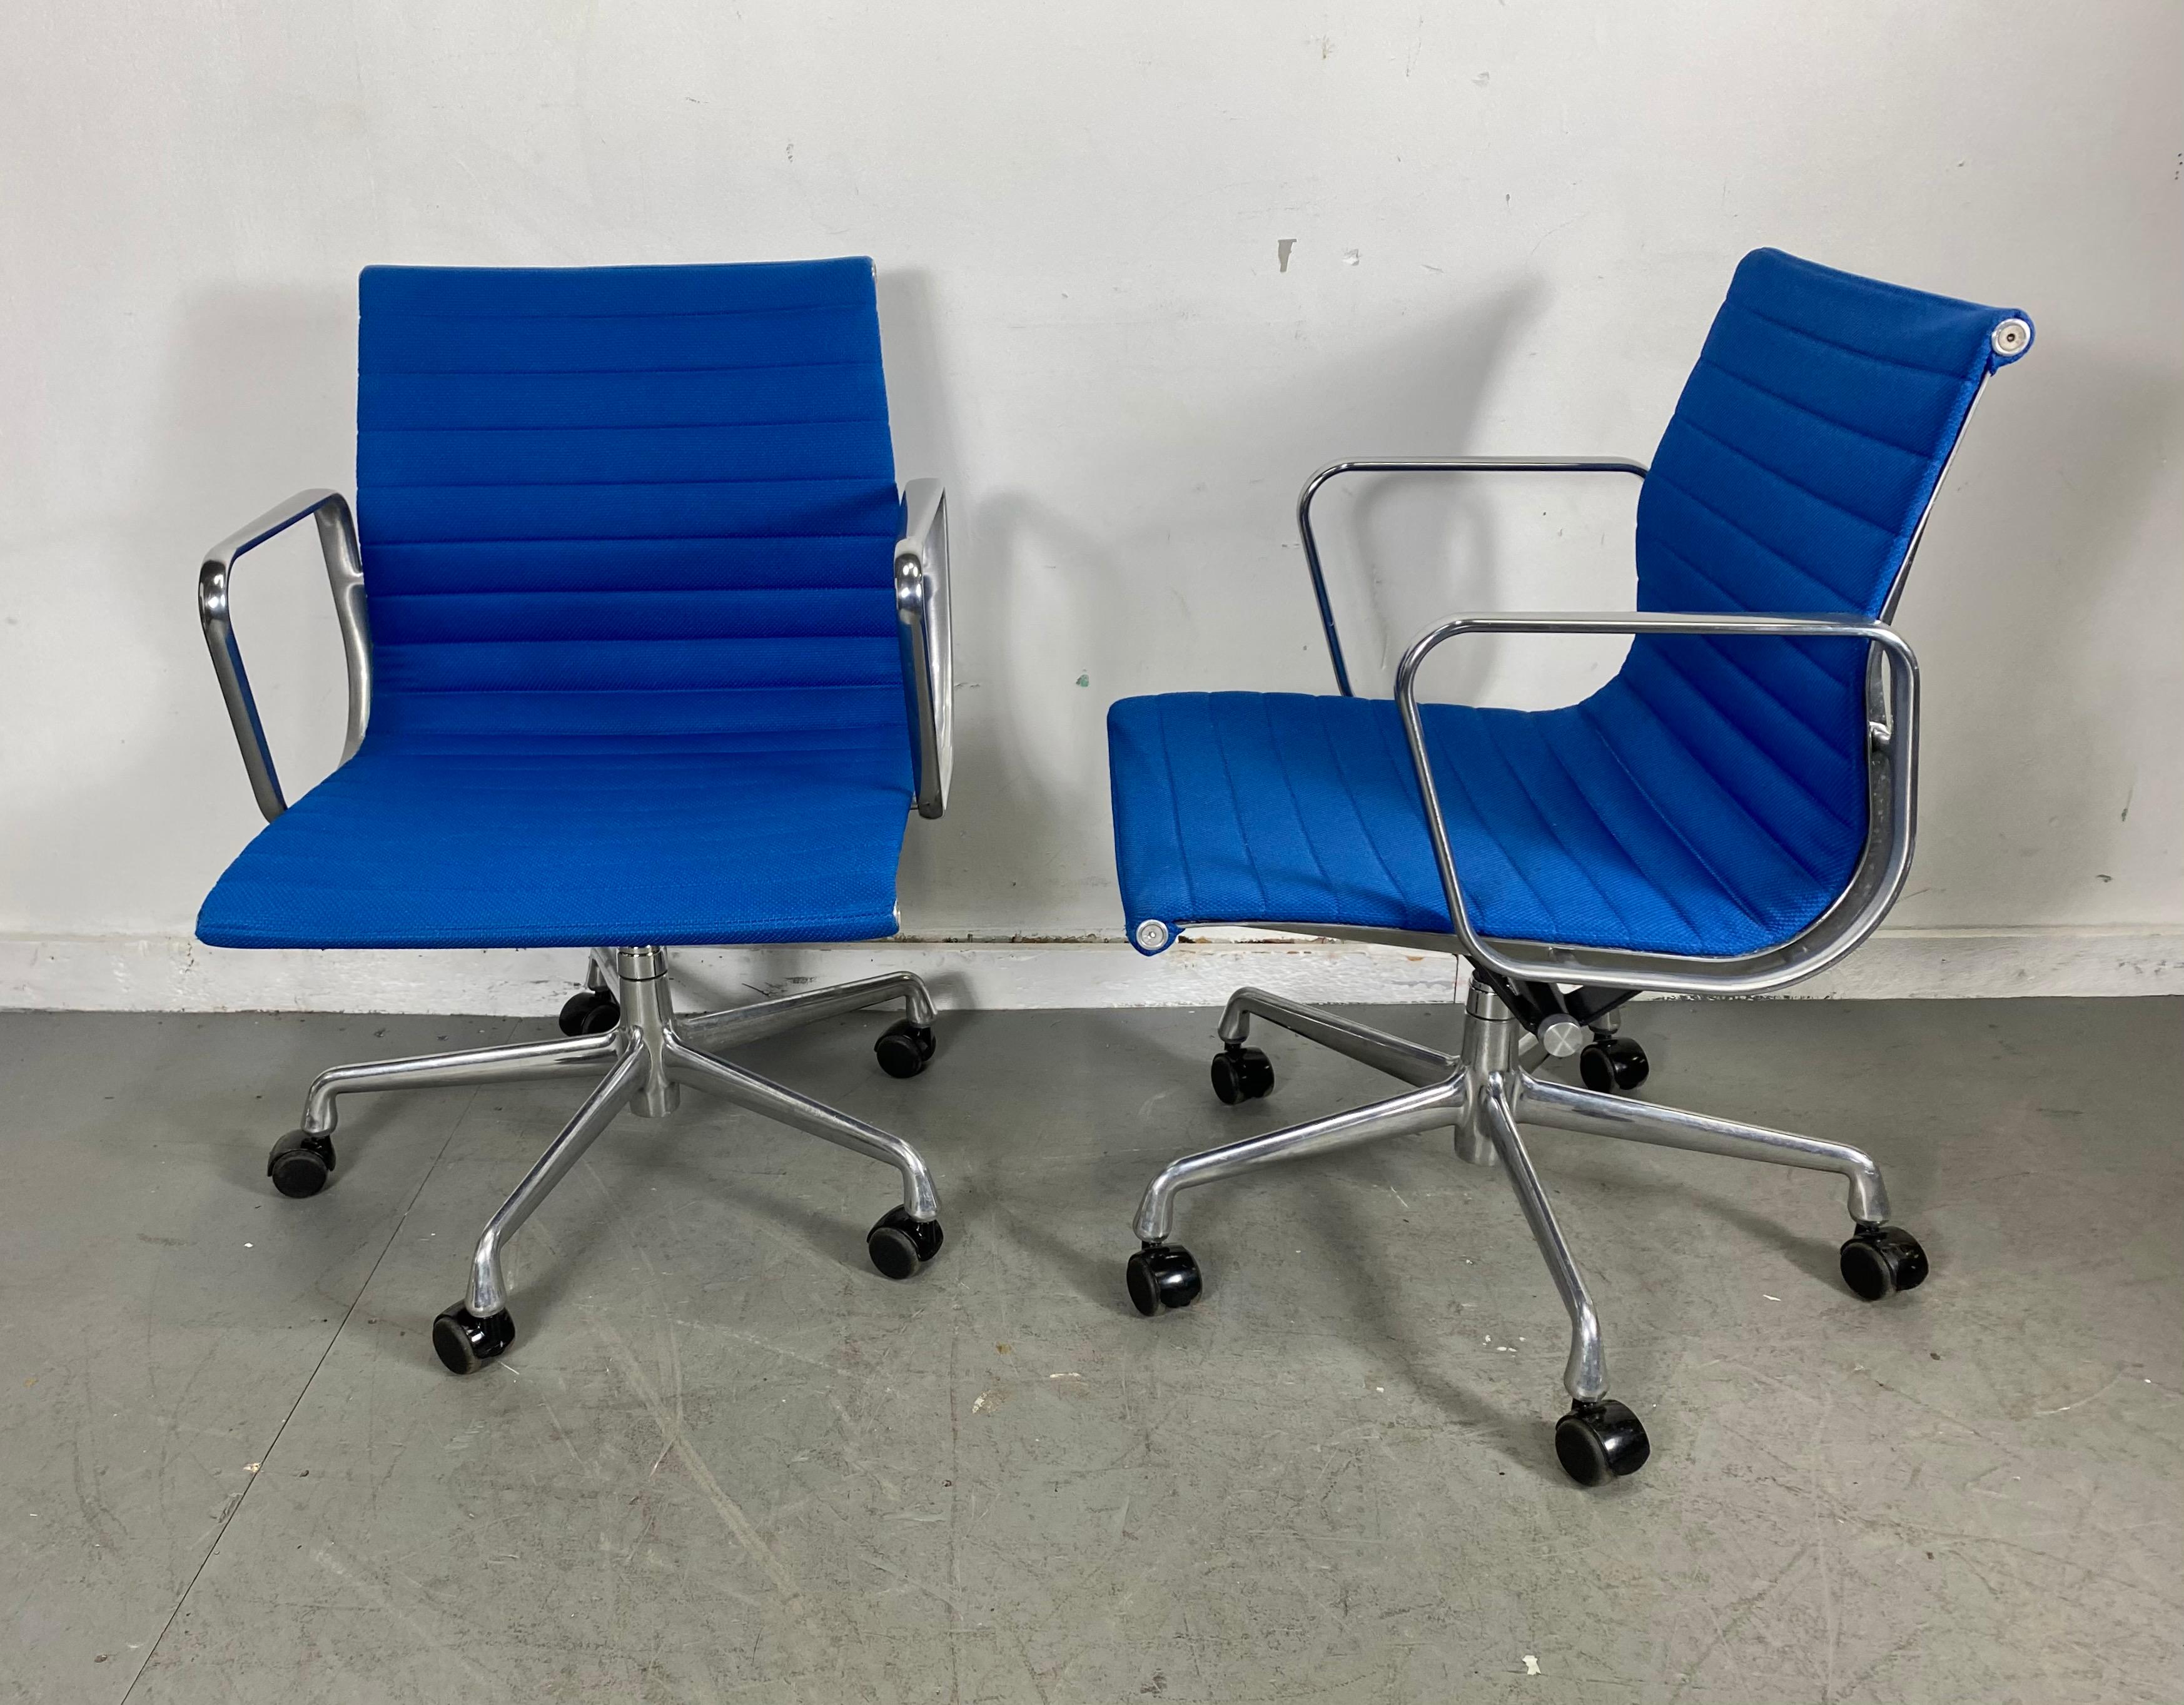 Great set of 6 adjustable arm chairs on castors. Aluminum Group, designed by Charles and Ray Eames manufactured by Herman Miller, Amazing electric blue wool fabric, featuring adjustable height, tilt, 360% swivel, would be amazing dining room,